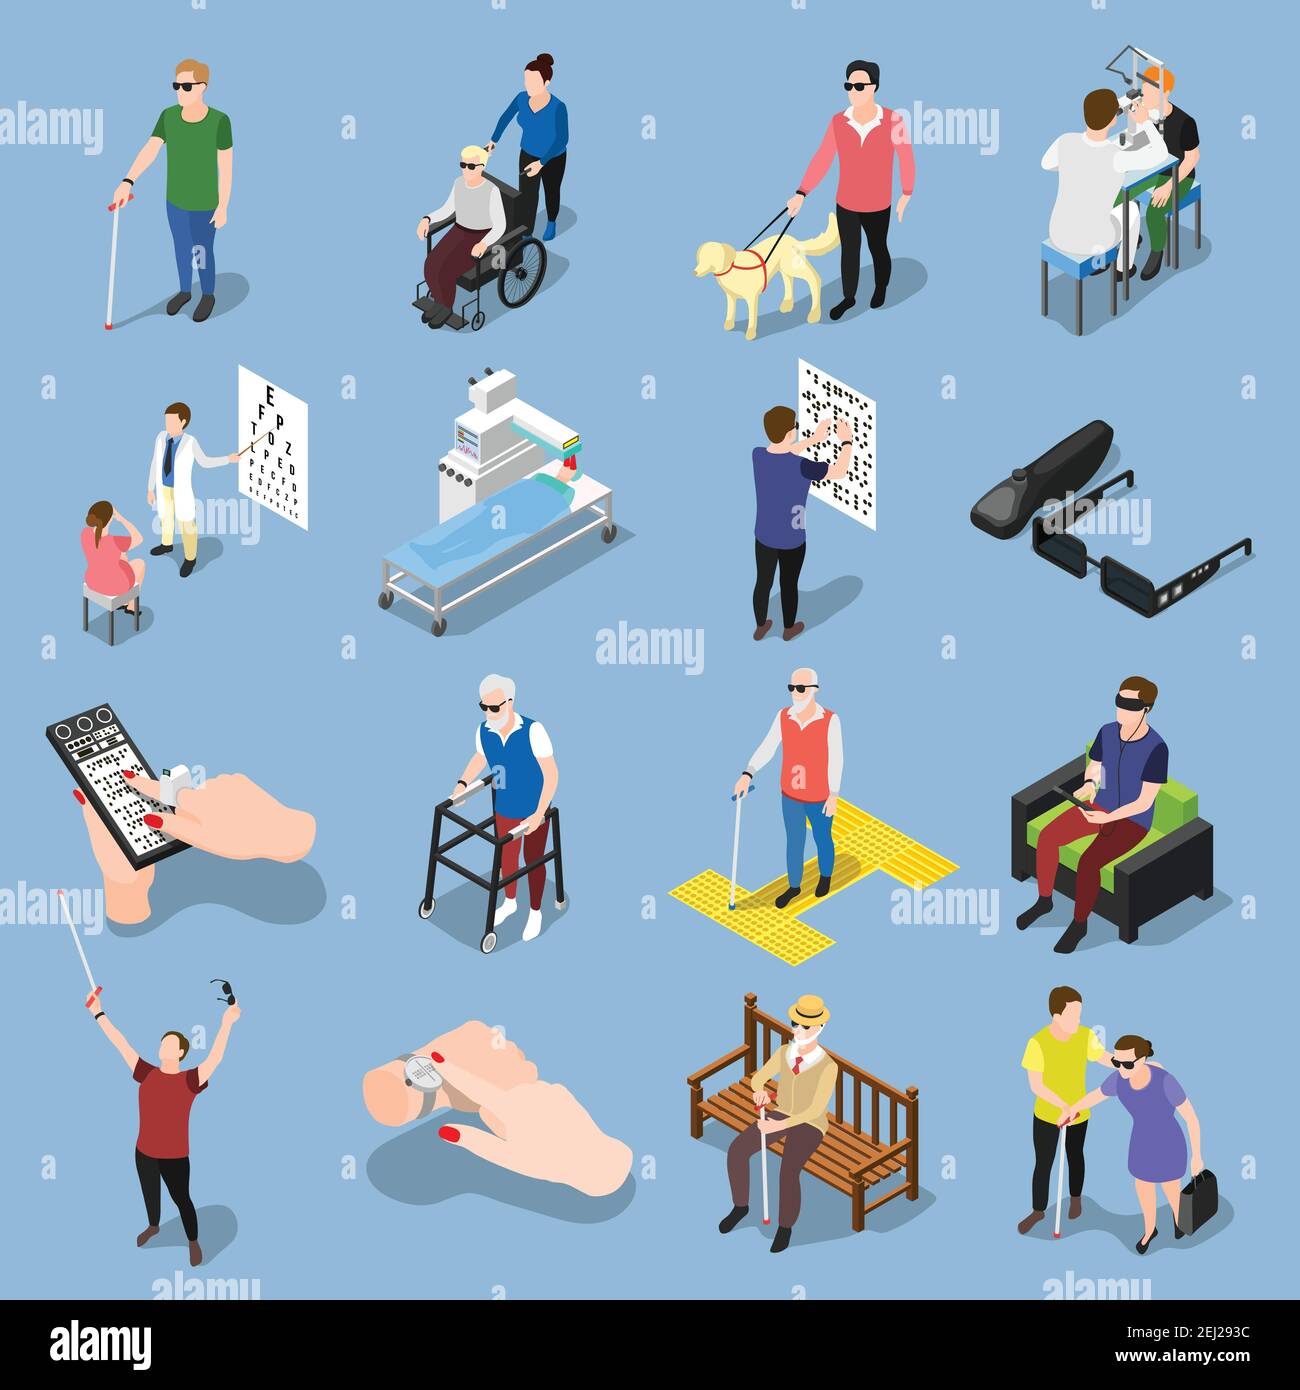 Isometric blind people icons collection of isolated realistic images of sightless human characters in different situations vector illustration Stock Vector